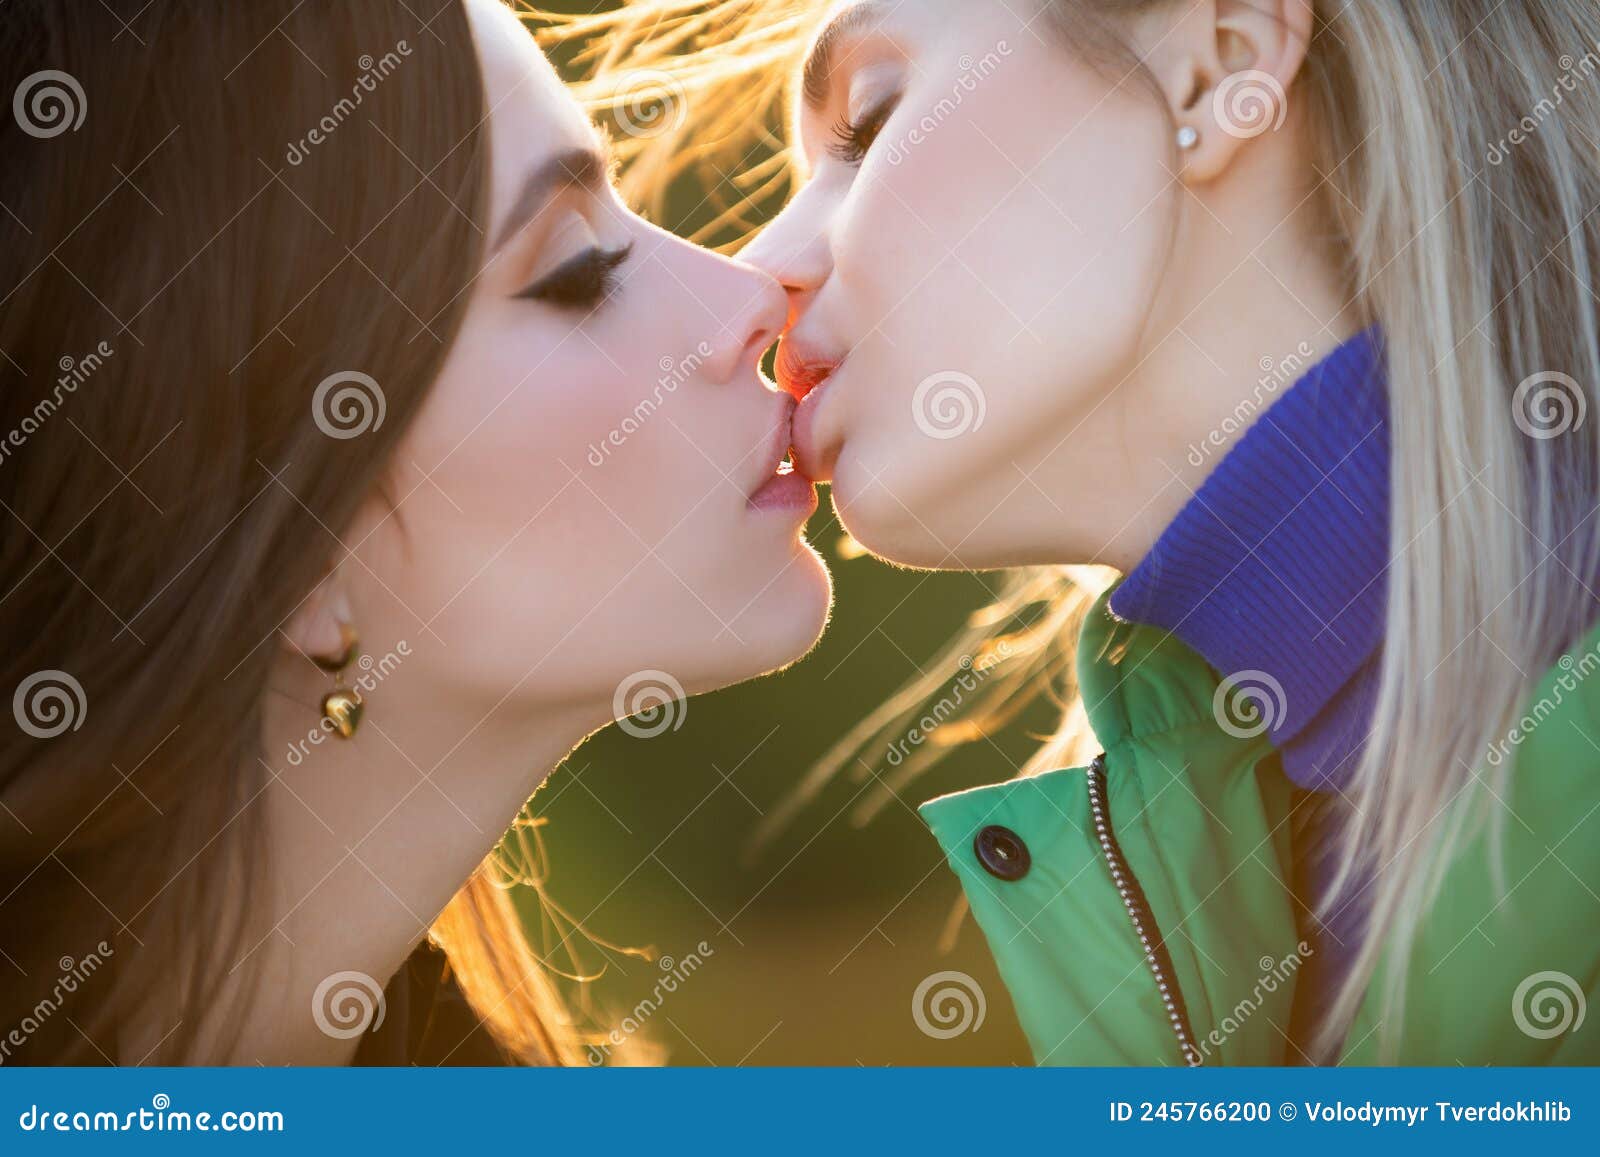 Almost Nude Lesbian Girls Kissing